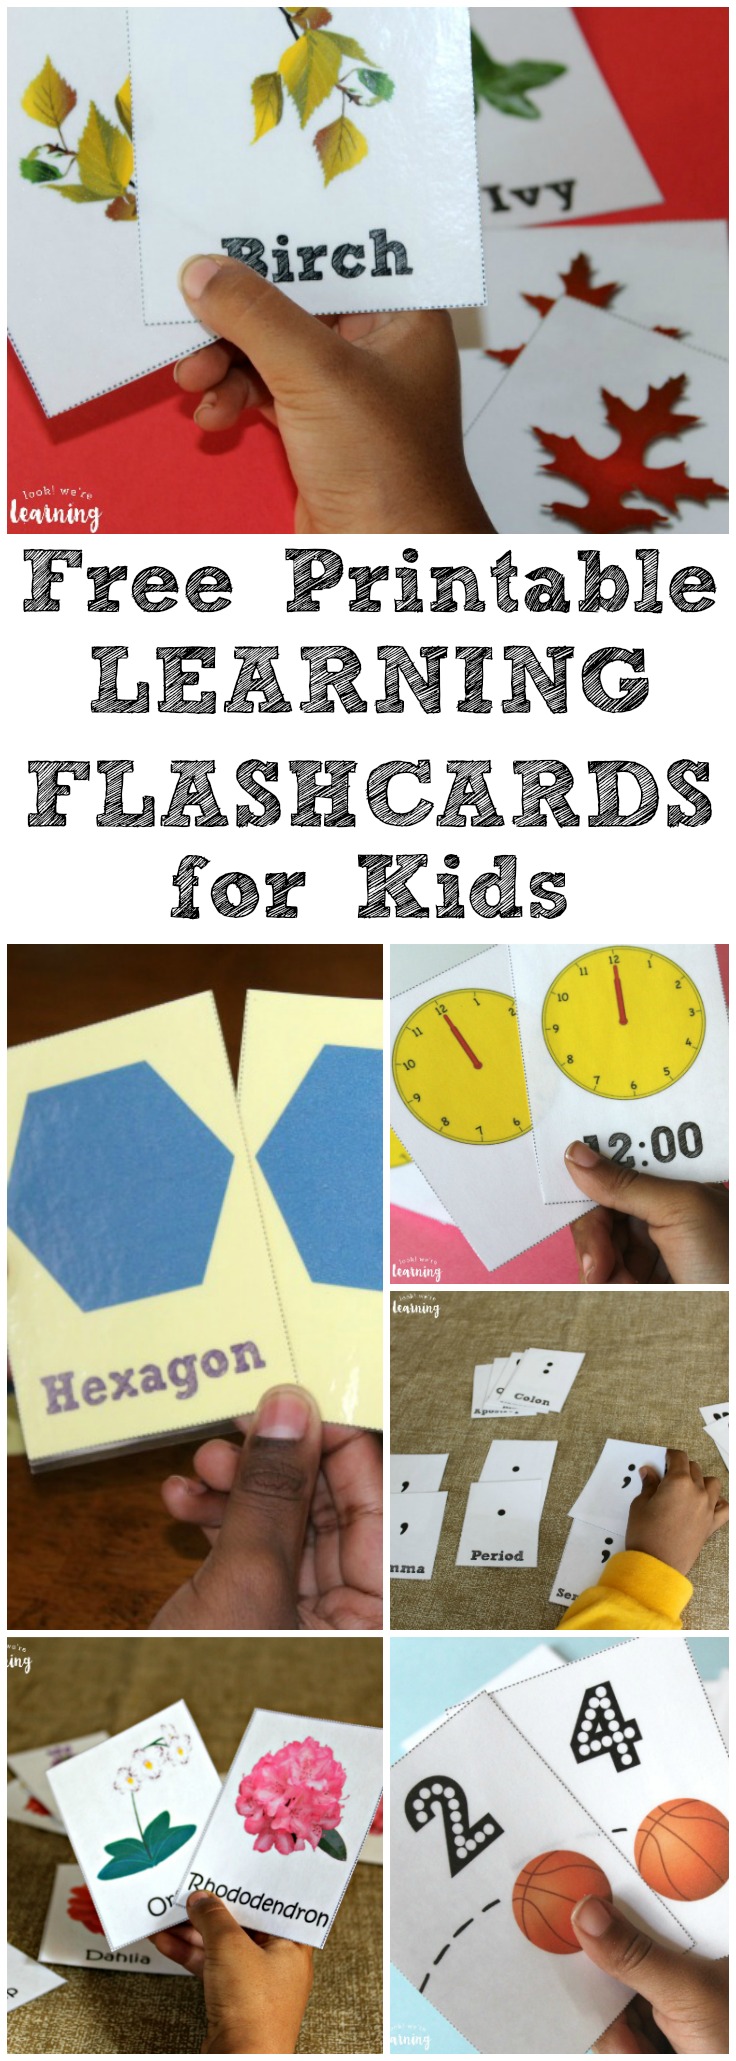 Pick up these free printable flashcards for preschoolers and elementary students!